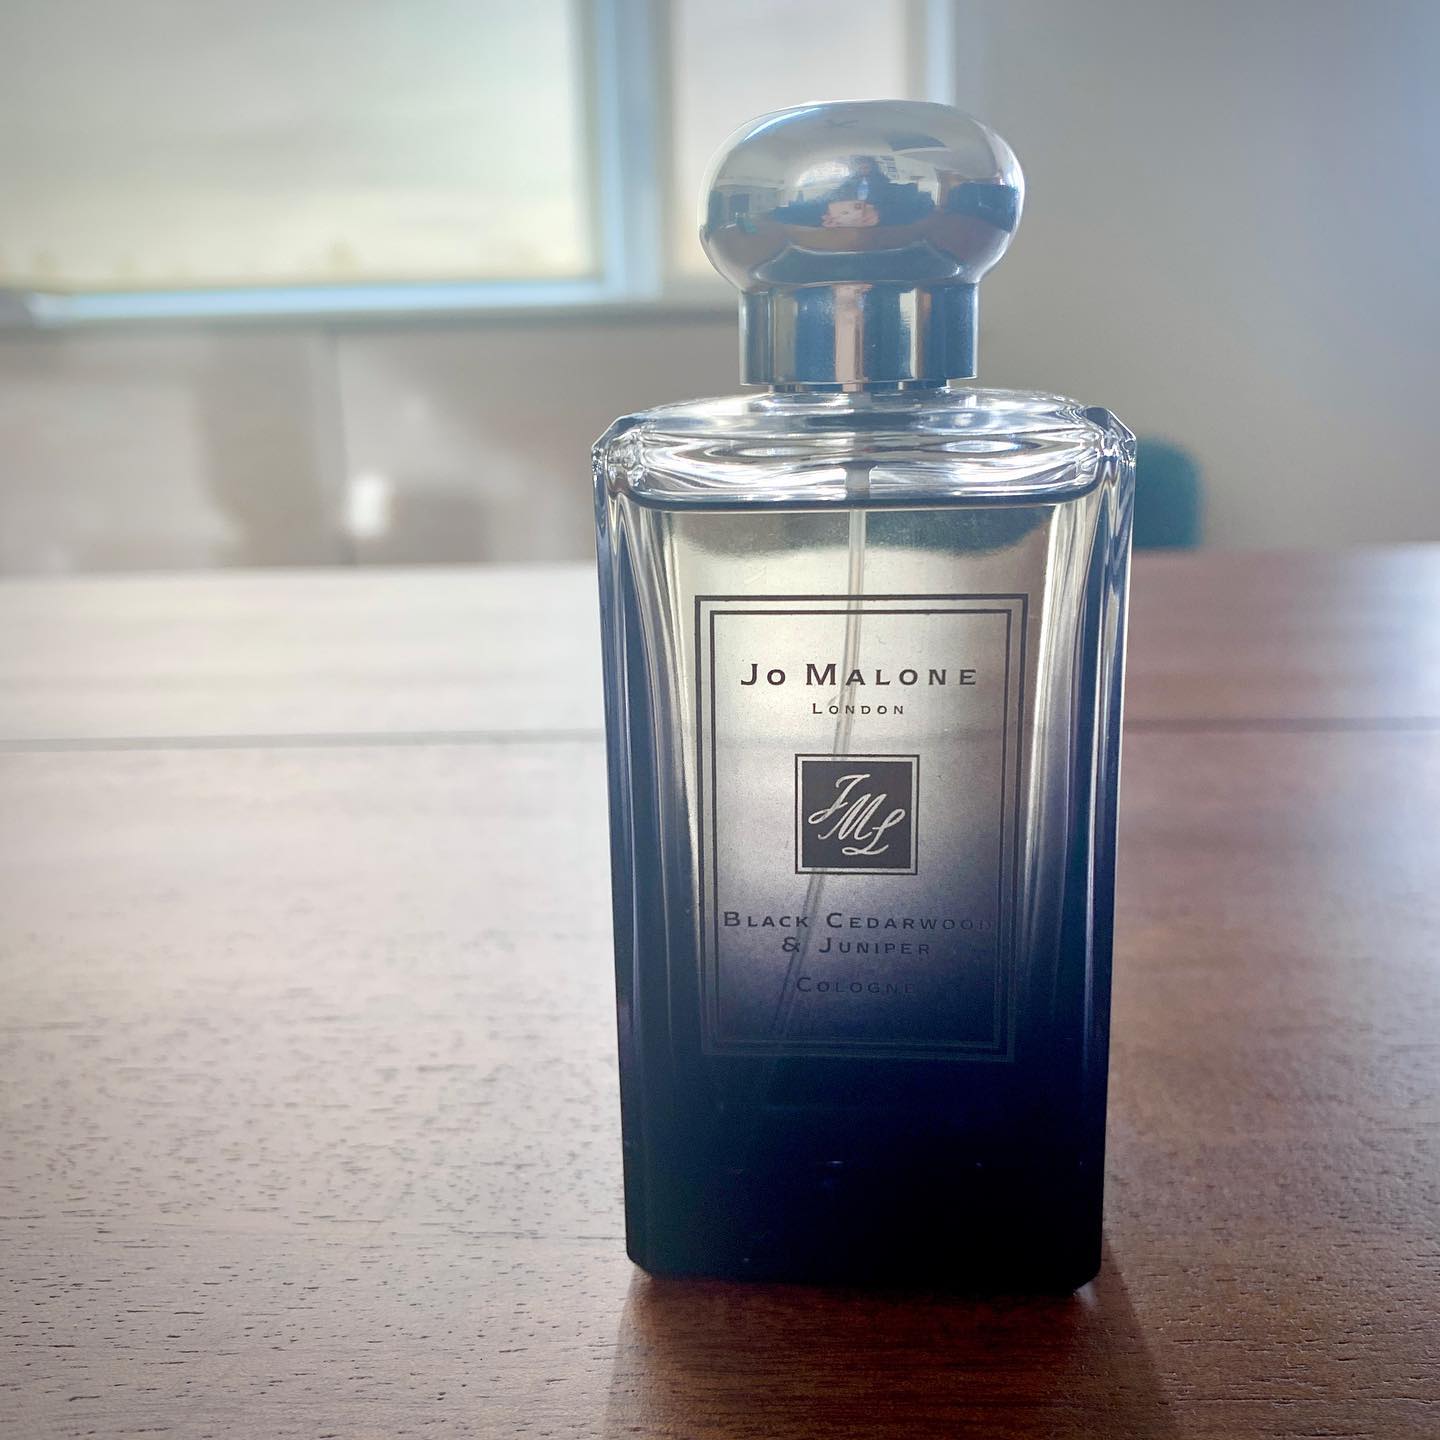 Jo Malone Black Cedarwood and Juniper Cologne Review | Canadian Beauty